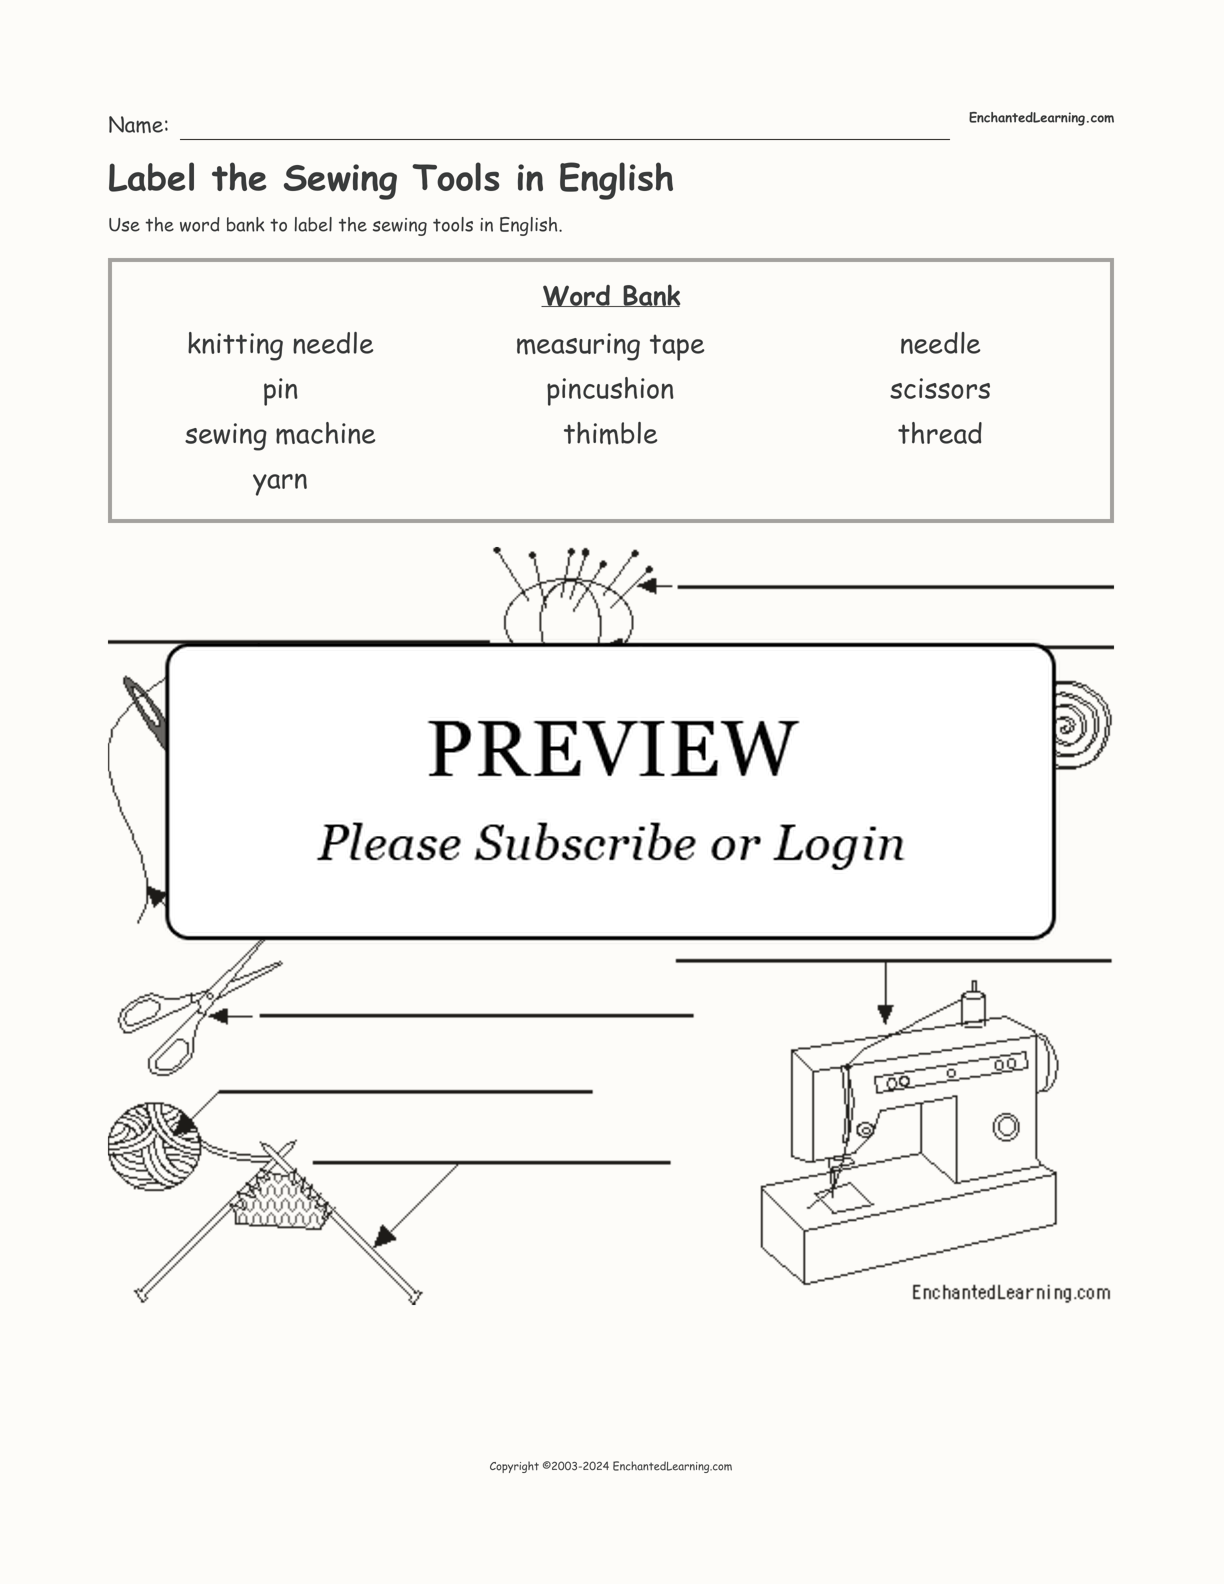 Label the Sewing Tools in English interactive worksheet page 1